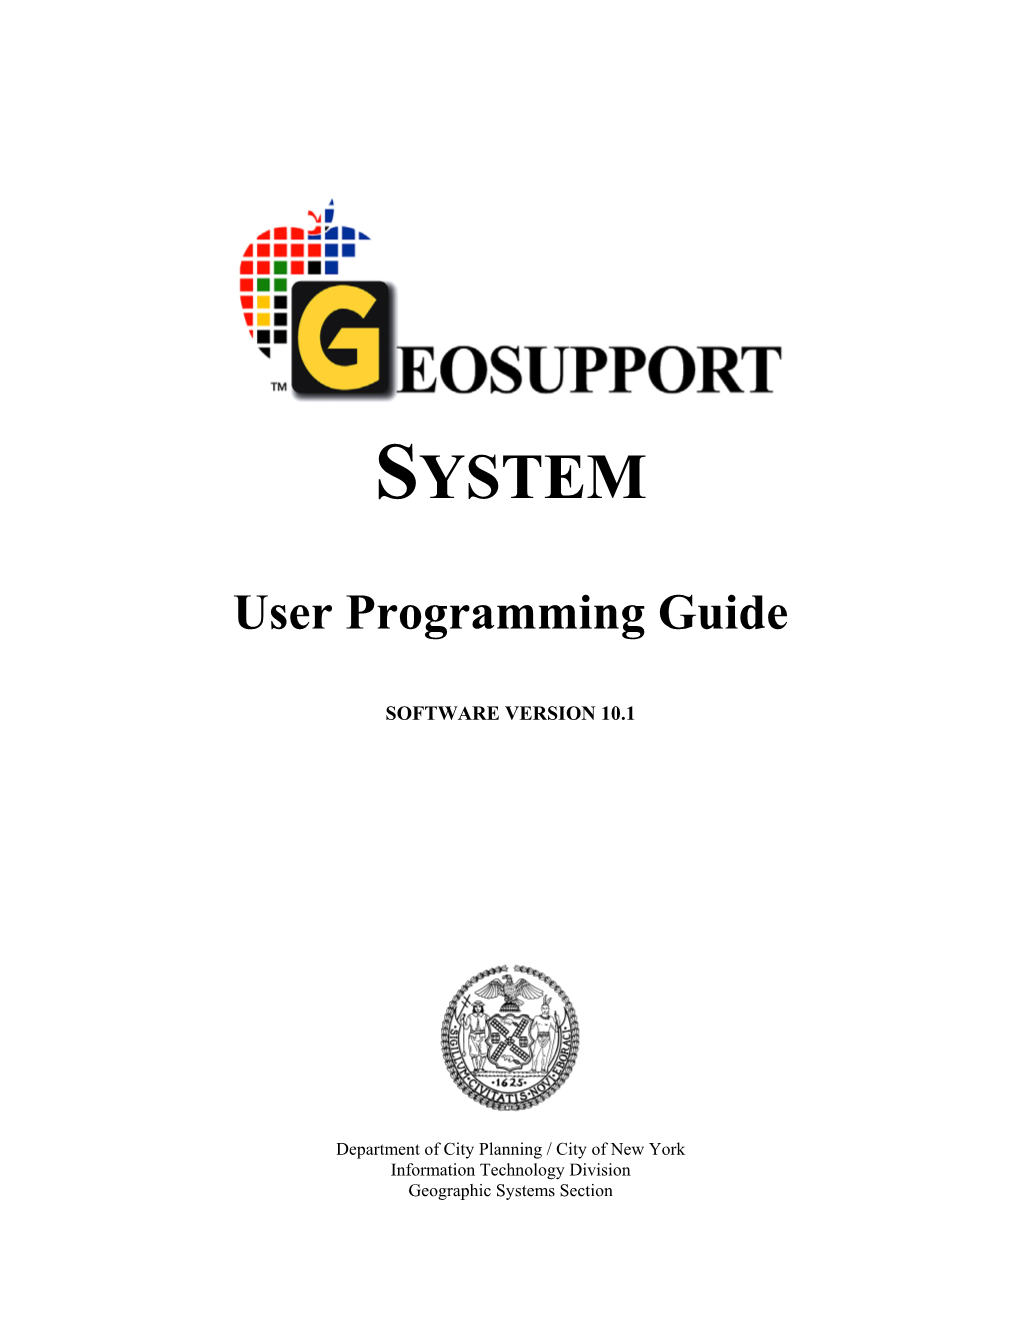 SYSTEM User Programming Guide Software Version 10.1 January, 2007